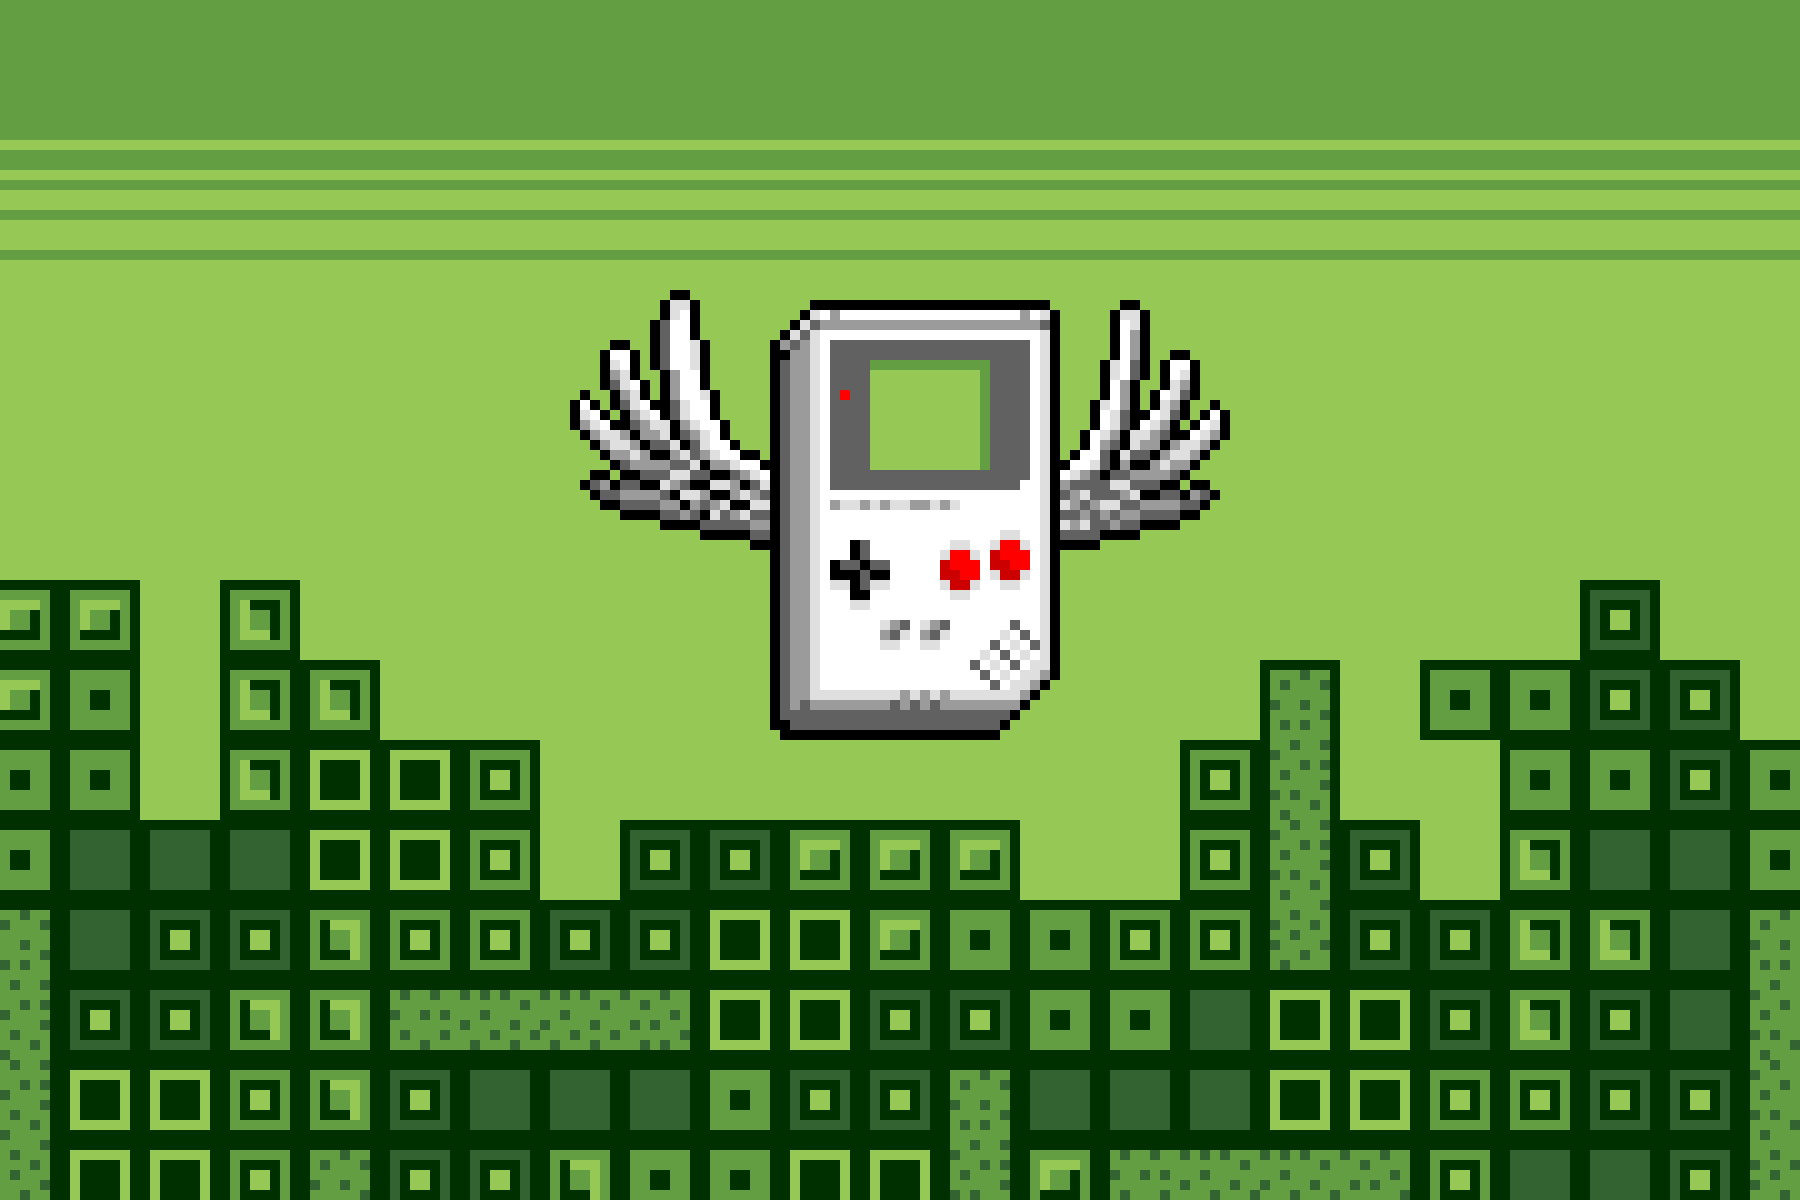 animation of Game Boy with wings flying above falling Tetris blocks